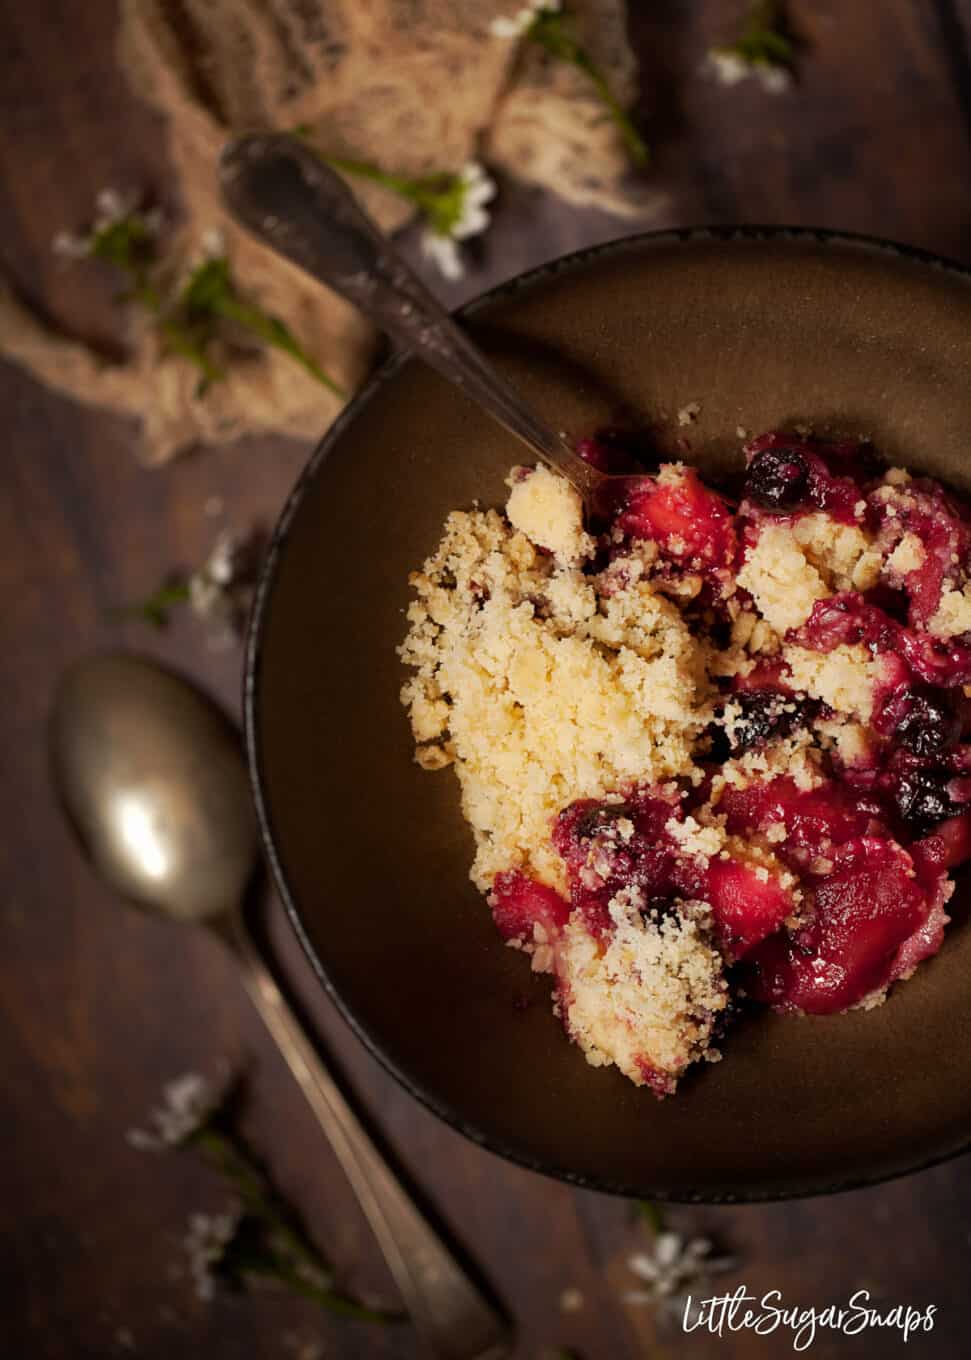 Close up of apple and blackcurrant crumble in a bowl in a rustic setting